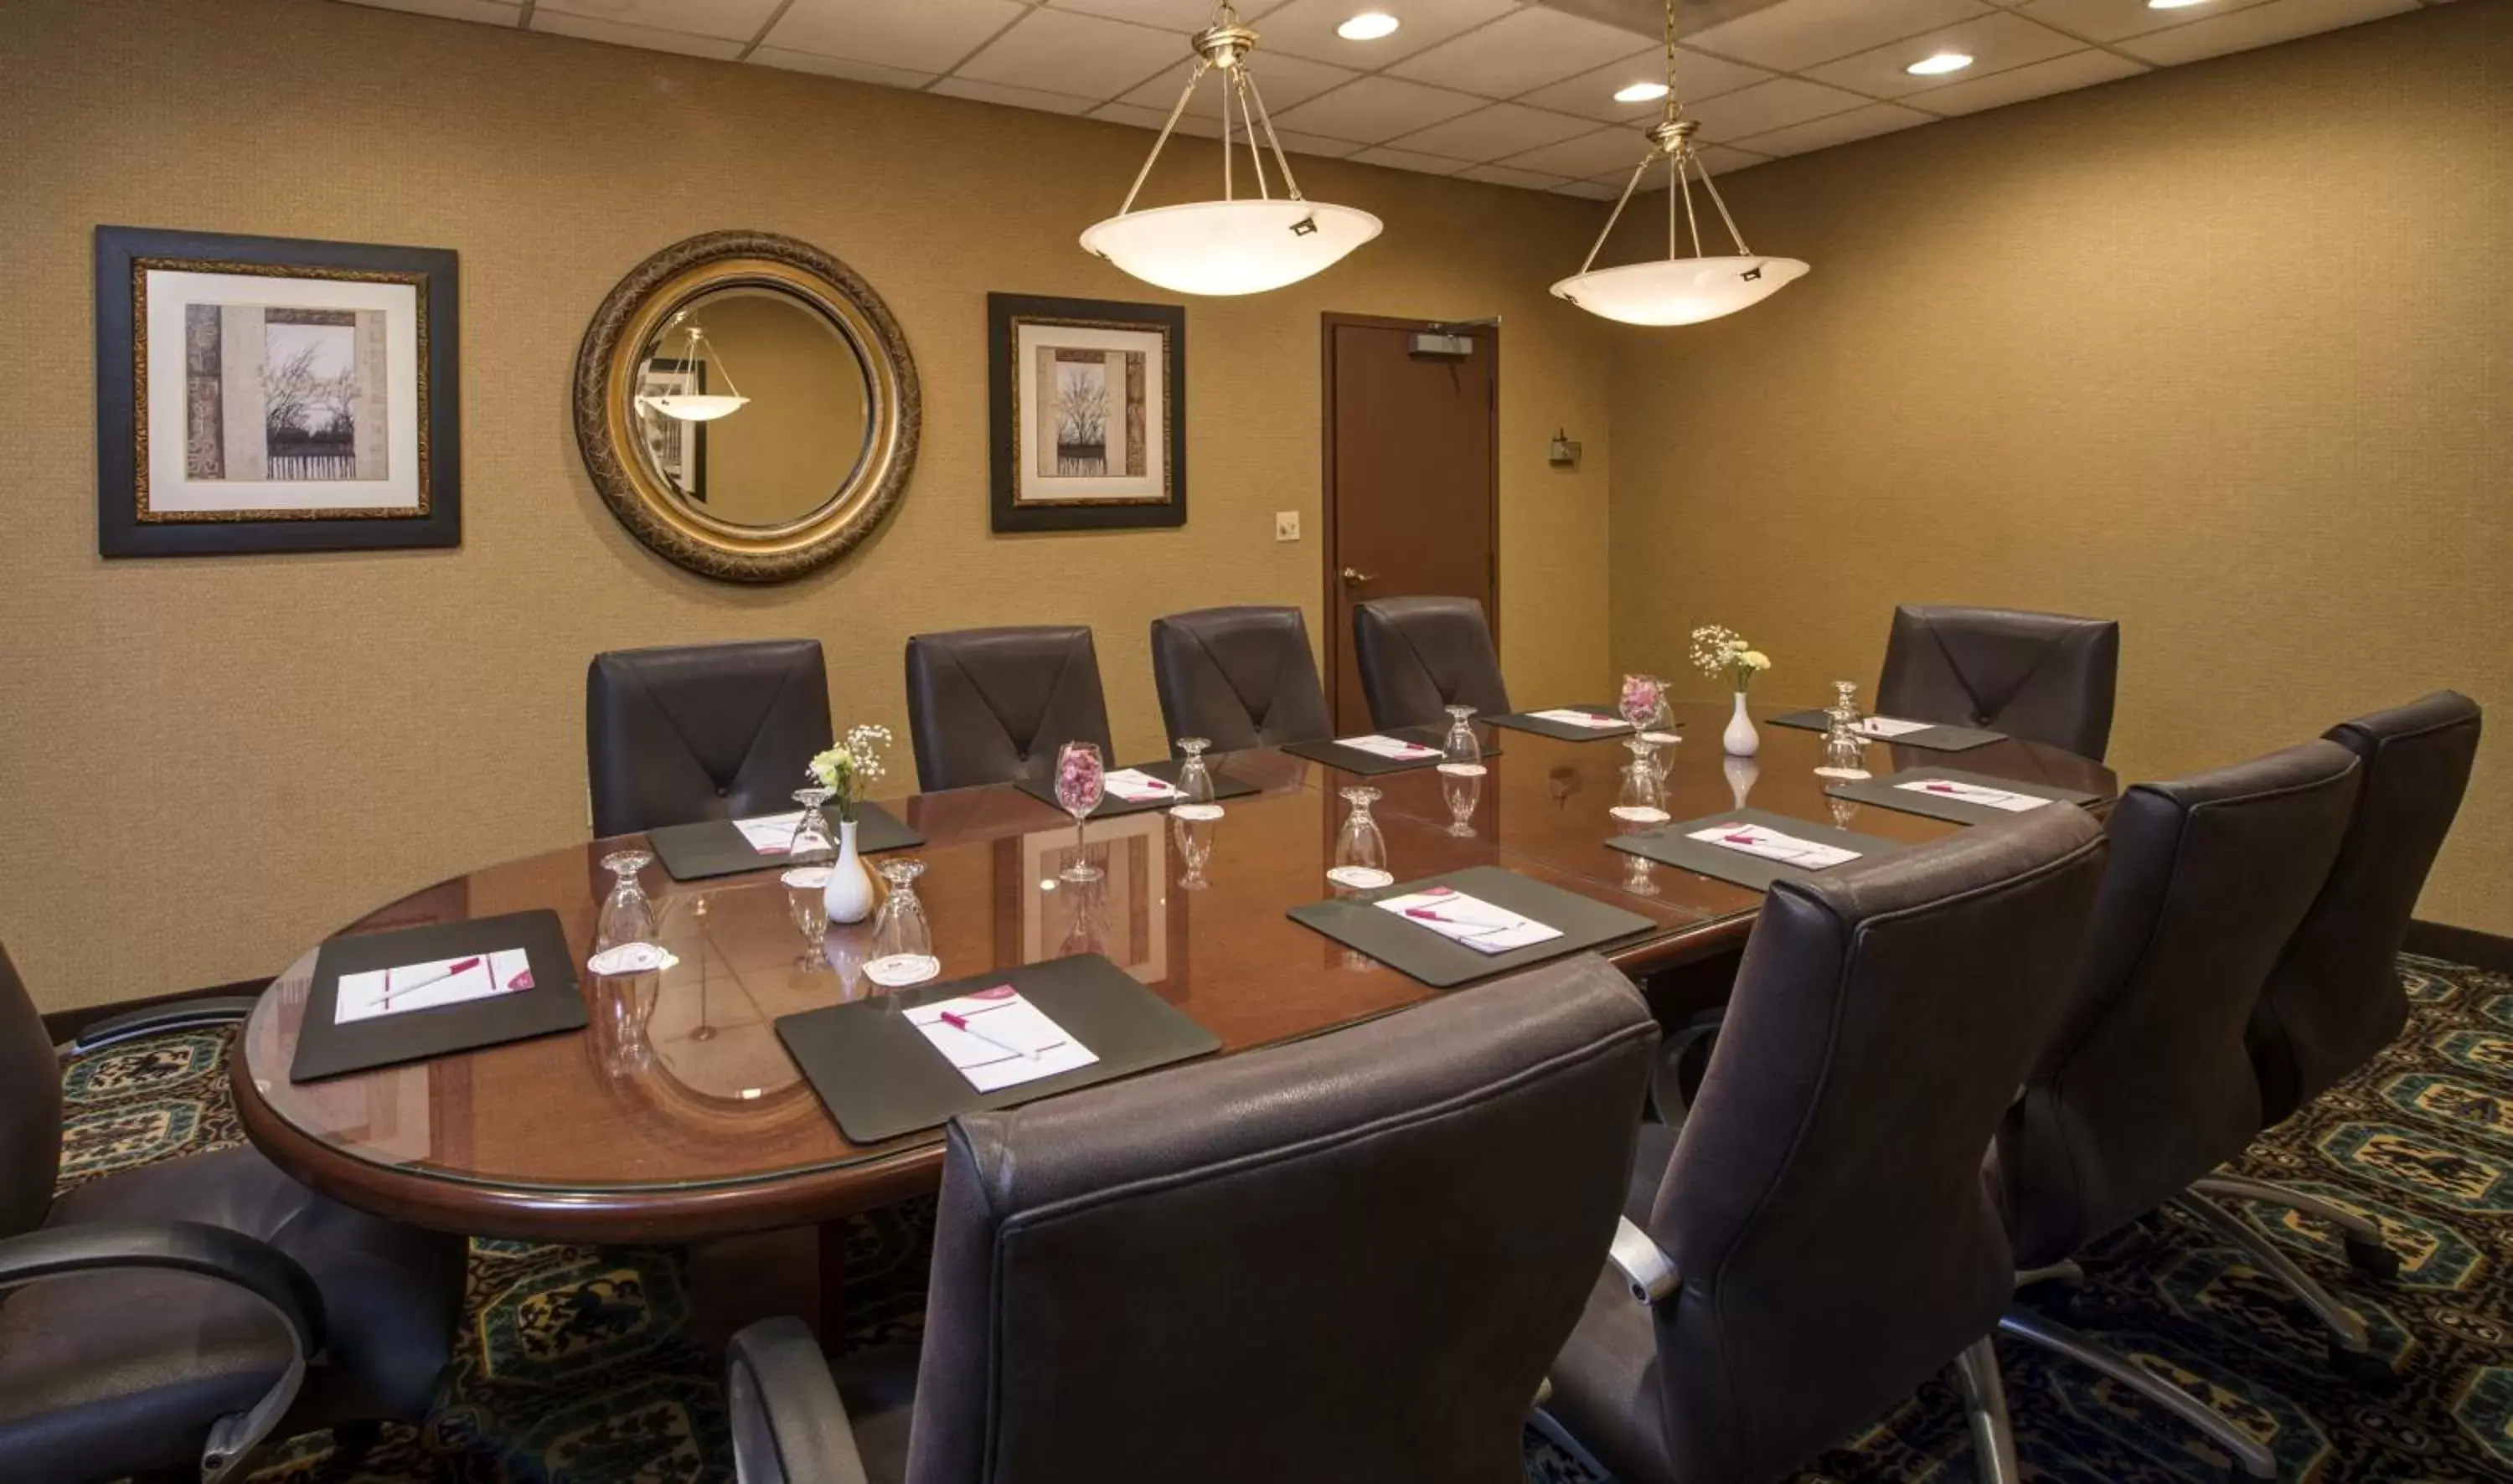 Business facilities in The Rockville Hotel, a Ramada by Wyndham